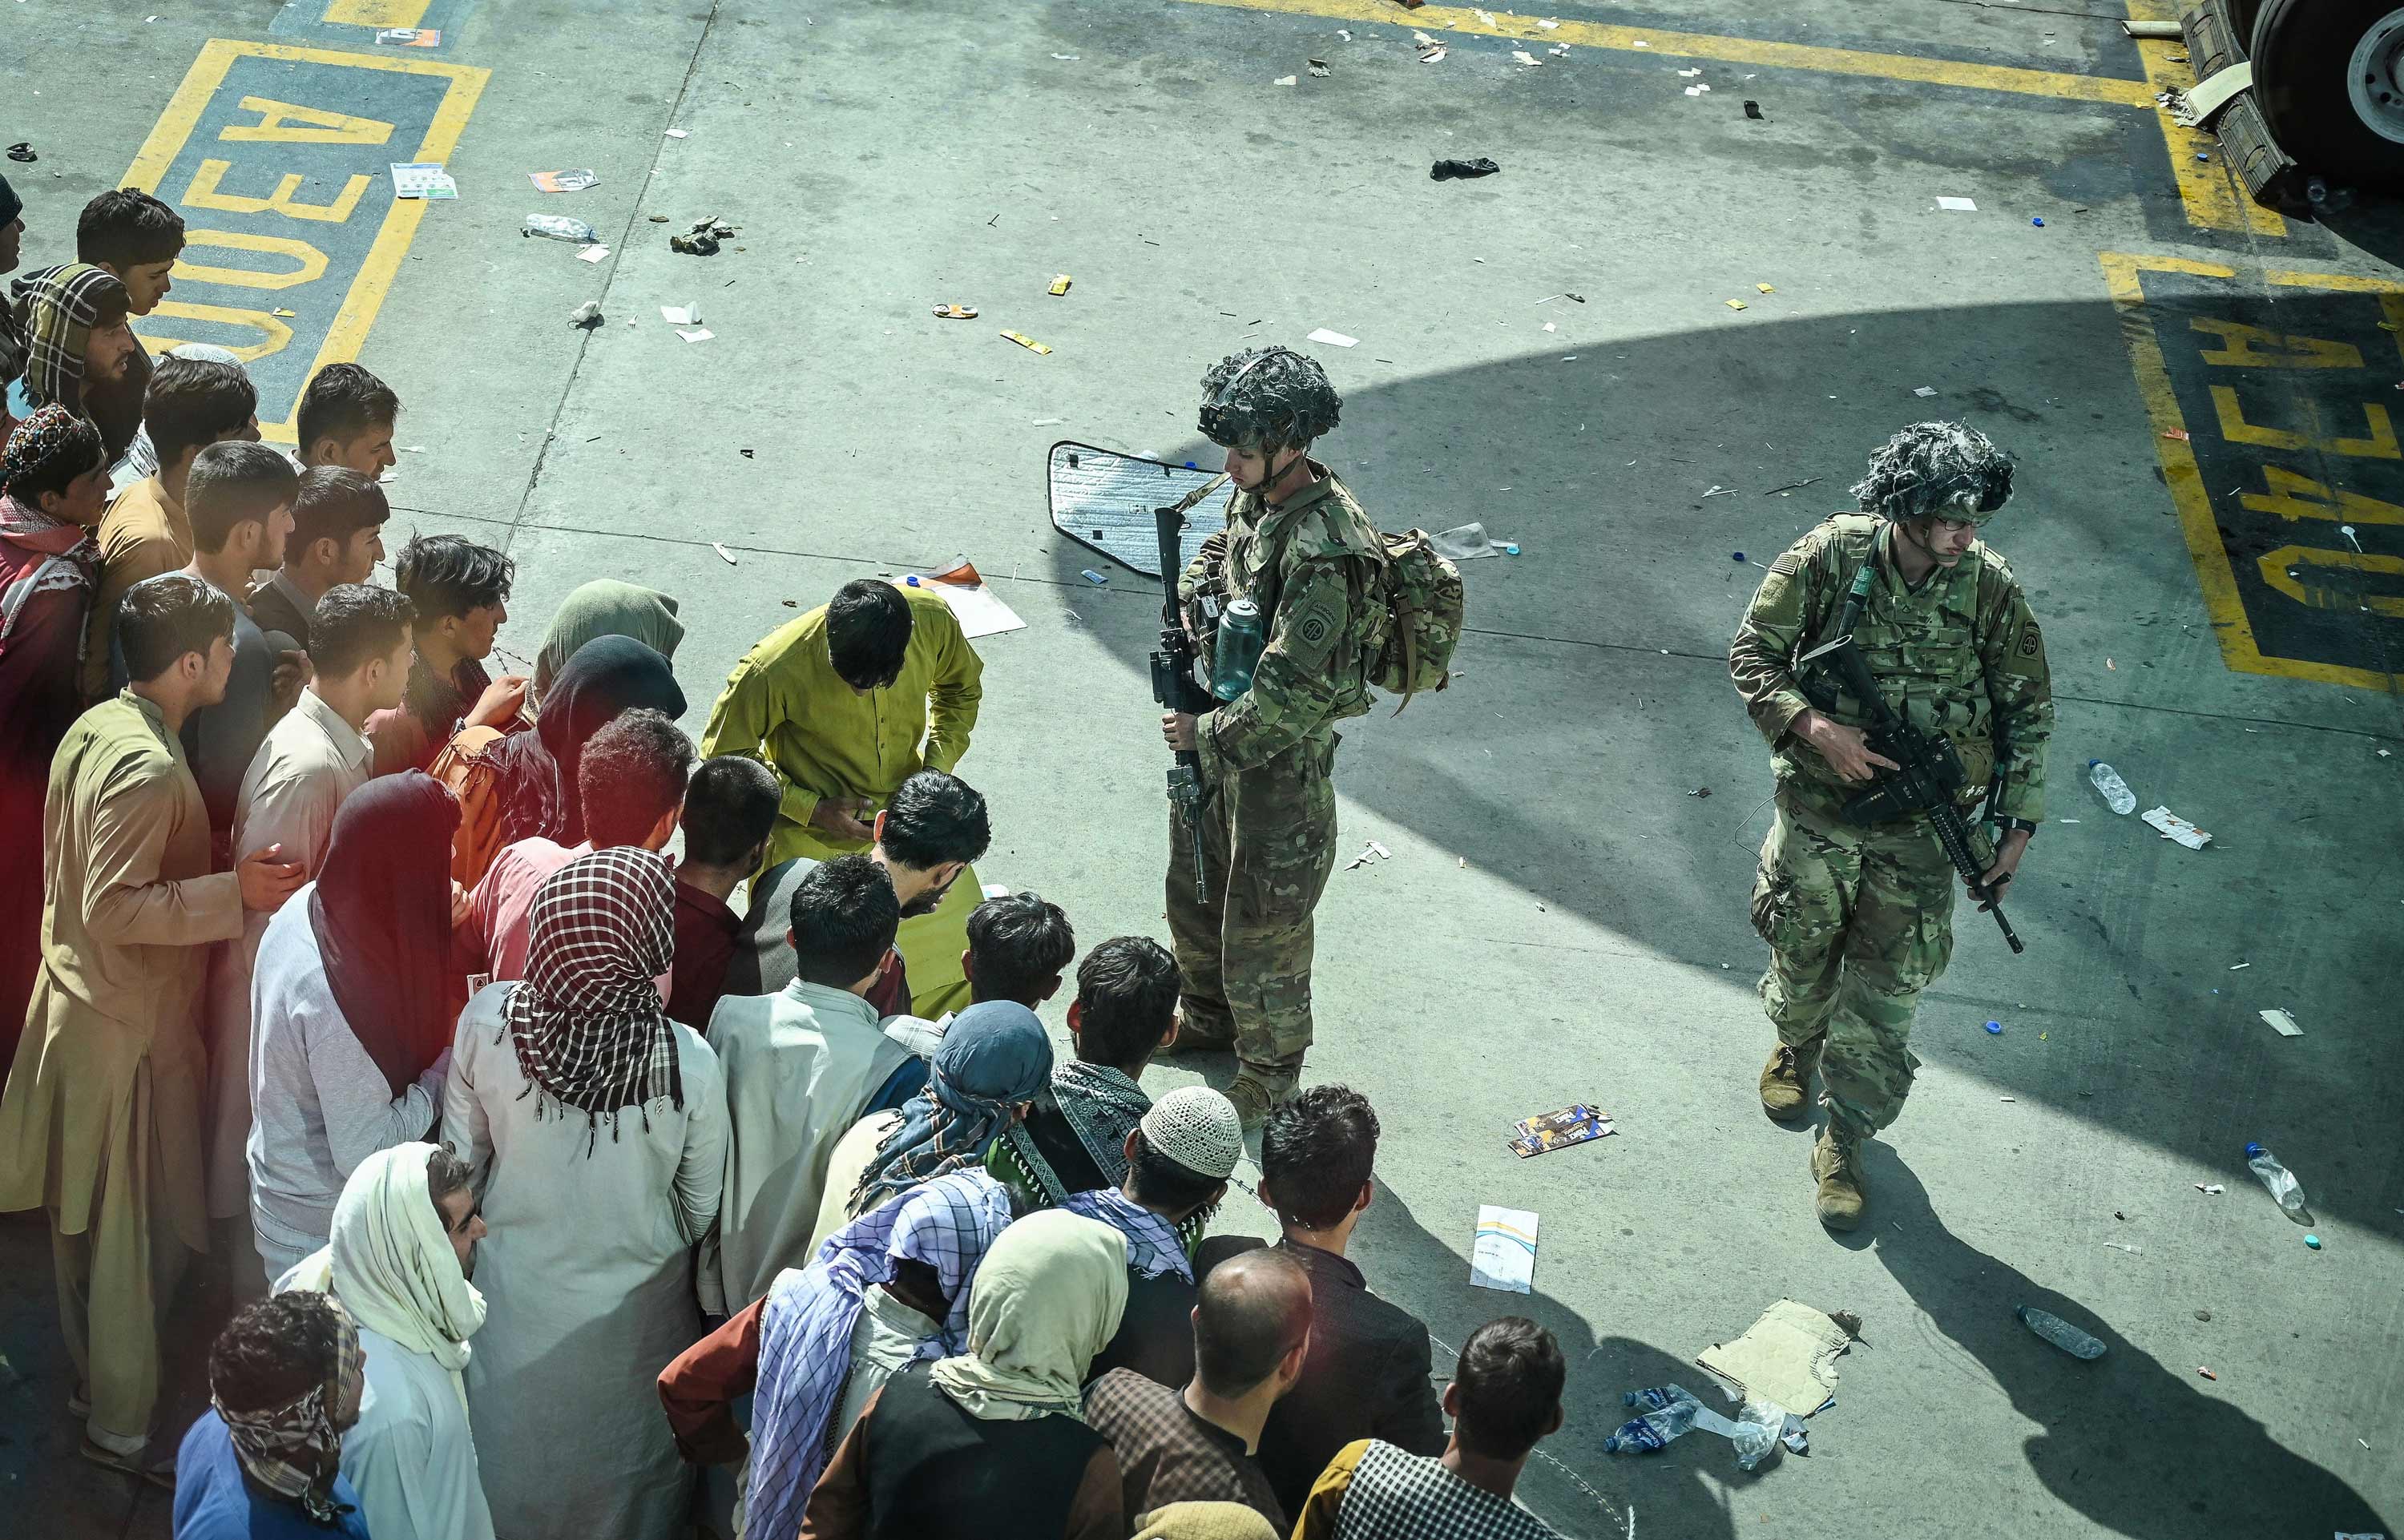 US soldiers stand guard as Afghan people wait at the Kabul airport on August 16.